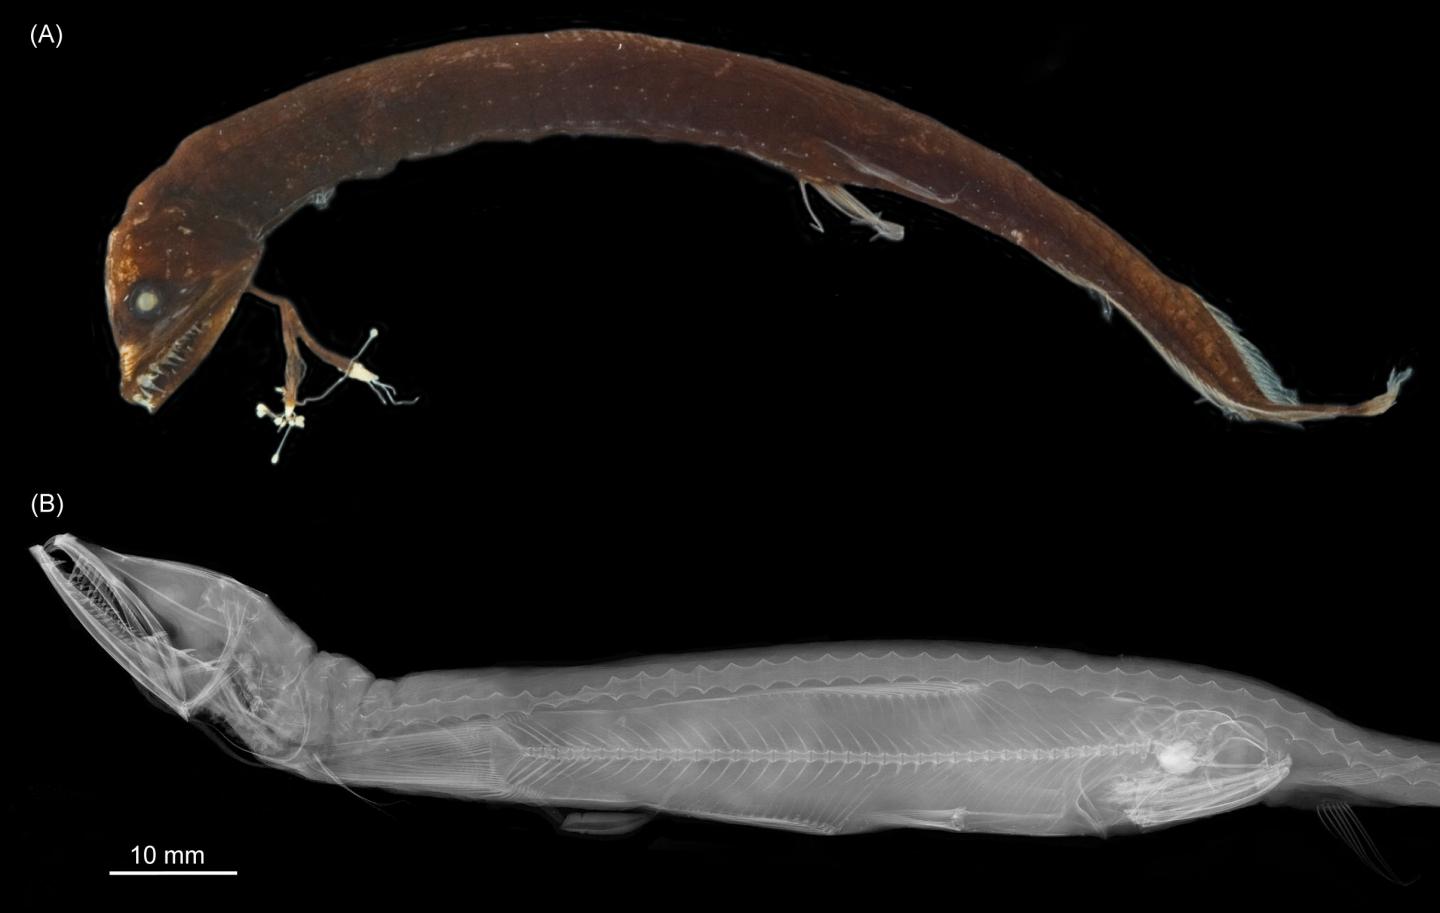 A Head Joint Found in Deep-Sea Fishes May Enable Them to Swallow Large Prey